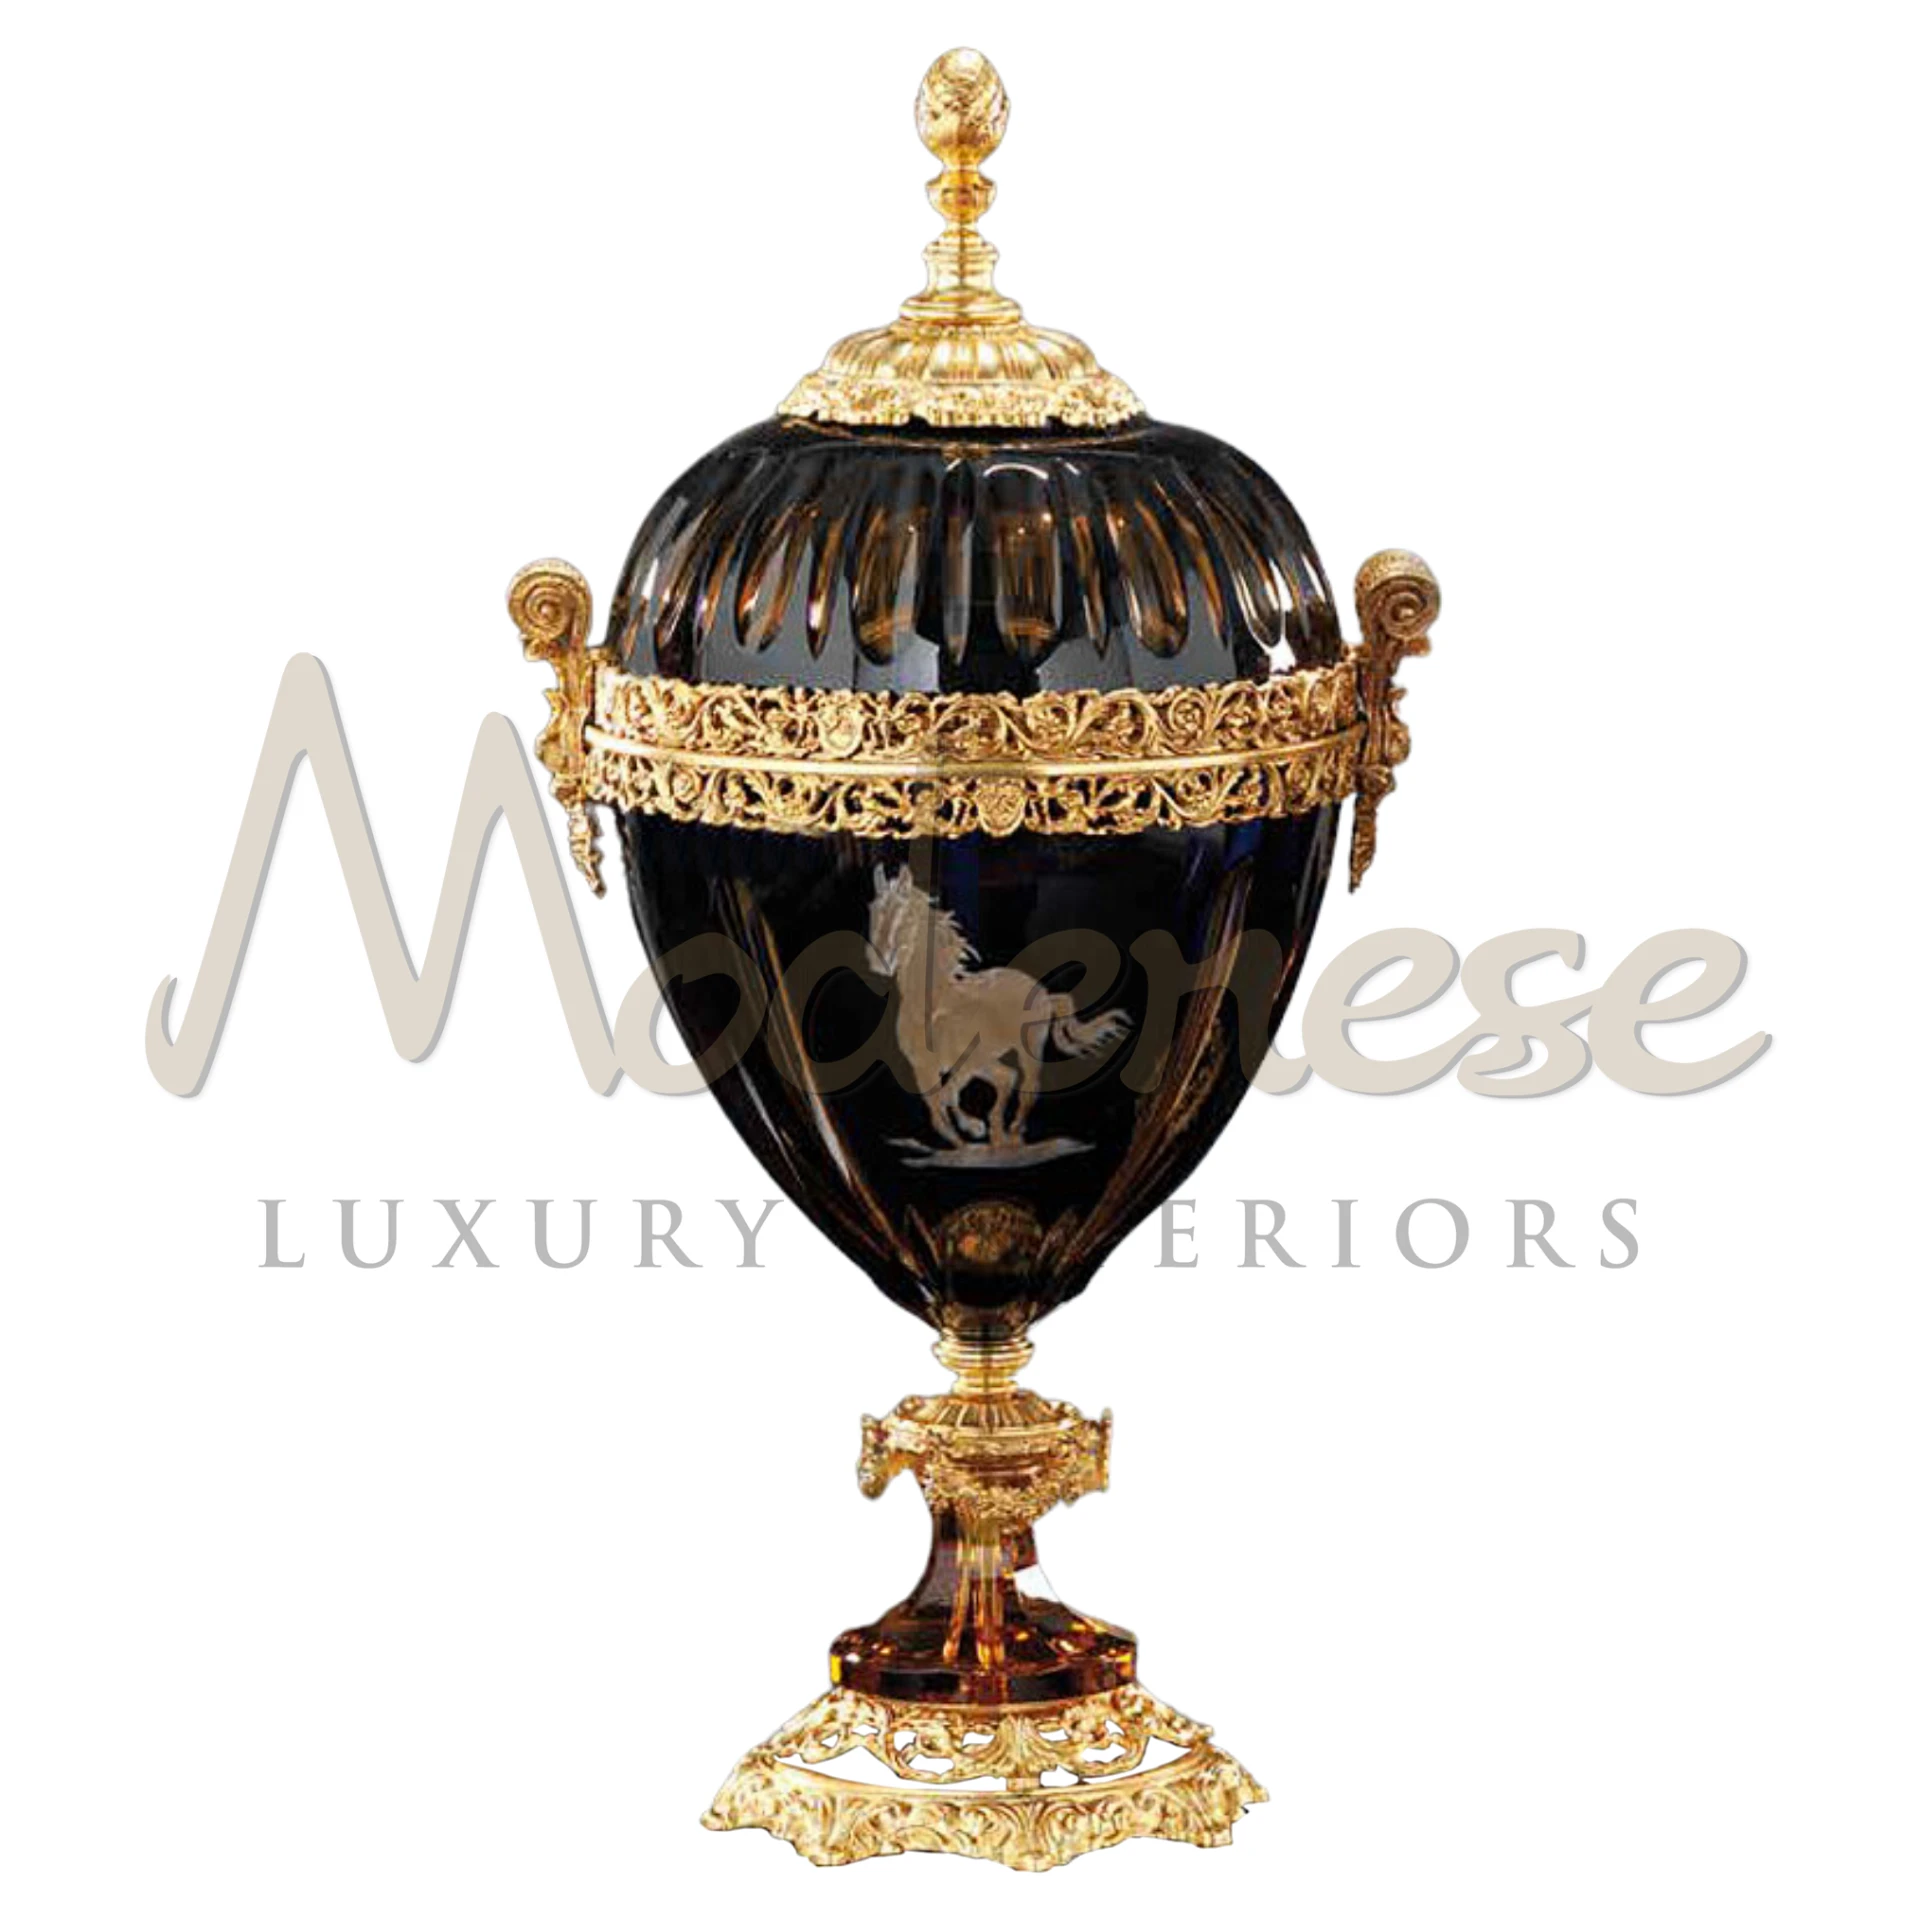 Modenese Gorgeous Horse Ornamented Glass Vase, a luxury piece fusing glass elegance with classical horse design.